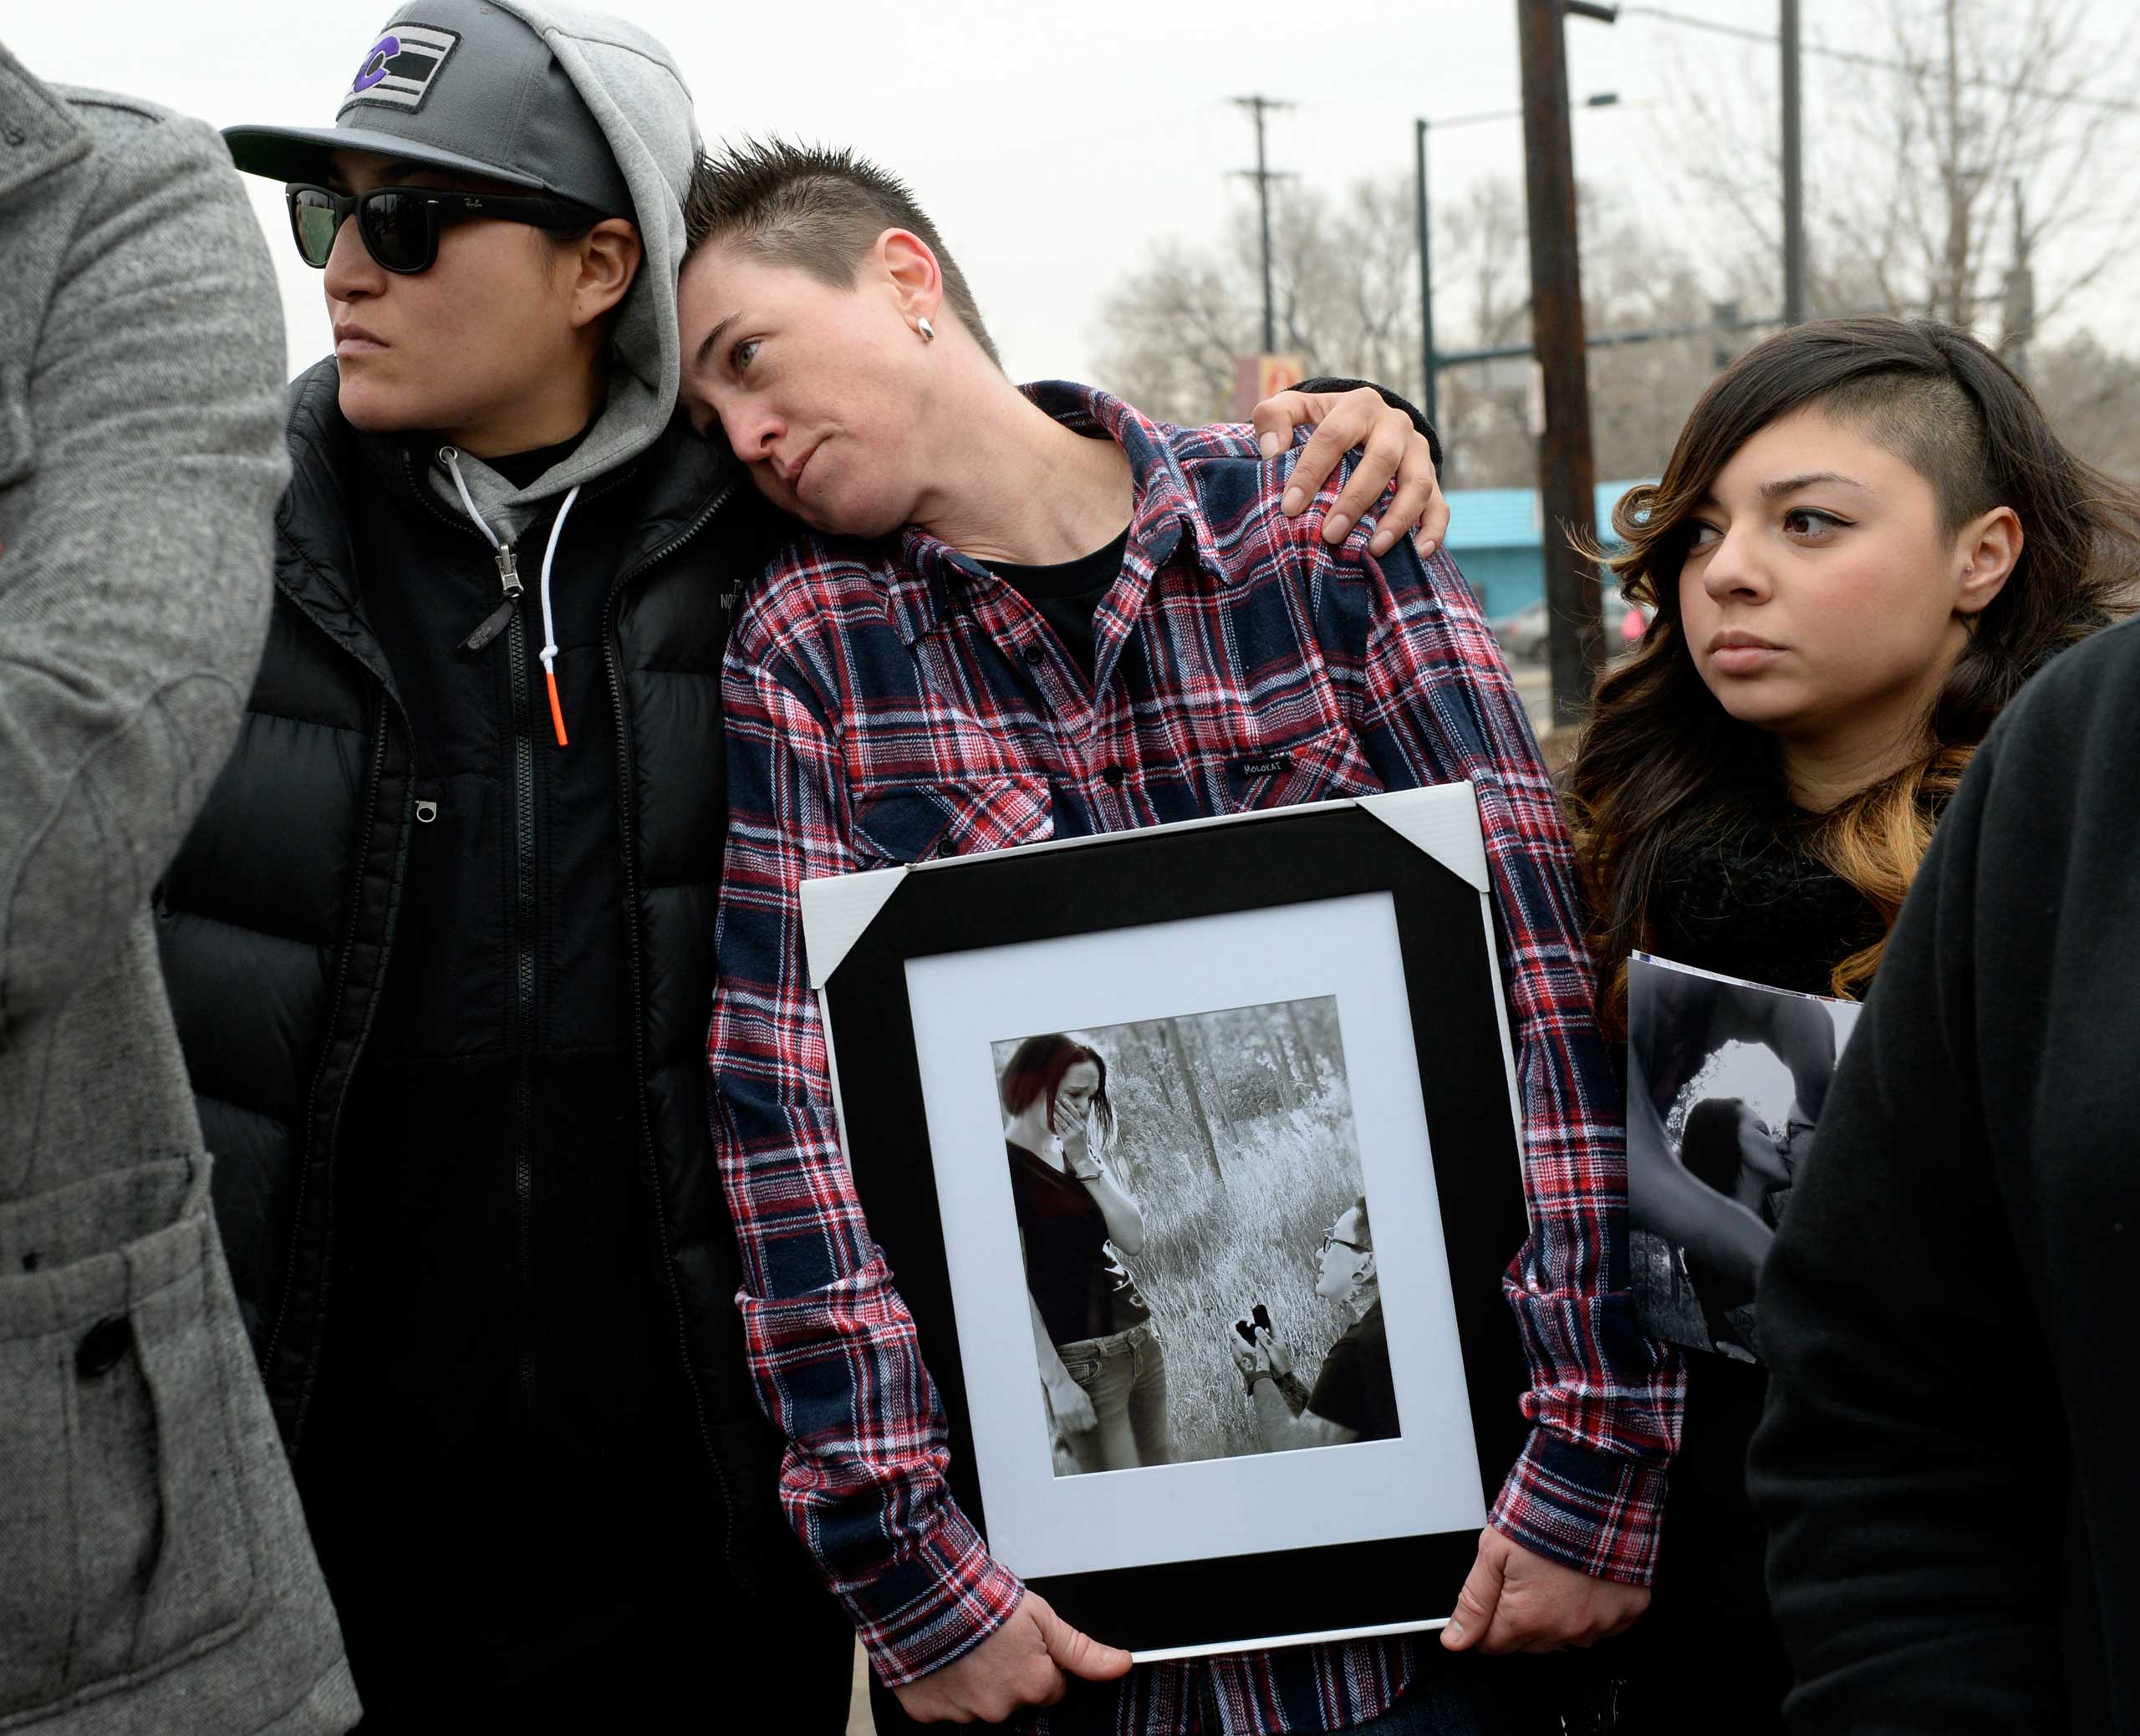 Cheyenne Poorbear, Samantha Getman and Victoria Quintana display photographs of Vanessa Collier and her partner, Christina Higley, during a rally outside New Hope Ministries in Lakewood, Colo.  Jan. 13, 2015. (Craig F. Walker—The Denver Post/AP)